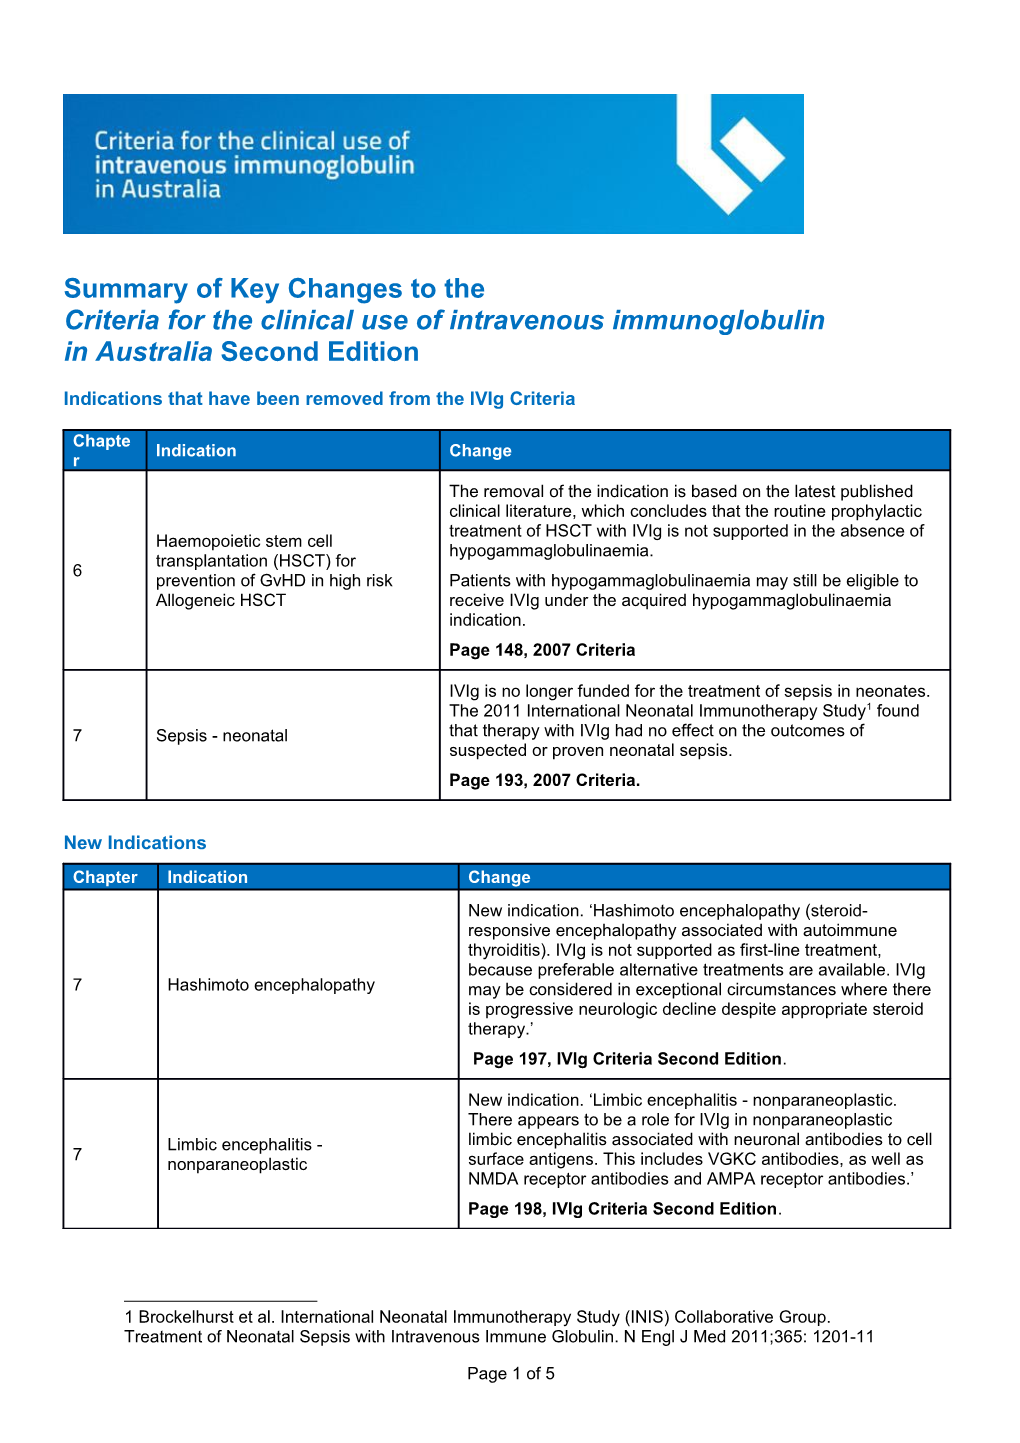 NBA - Summary of Key Changes to the Criteria for the Clinical Use of Intravenous Immunoglobulin